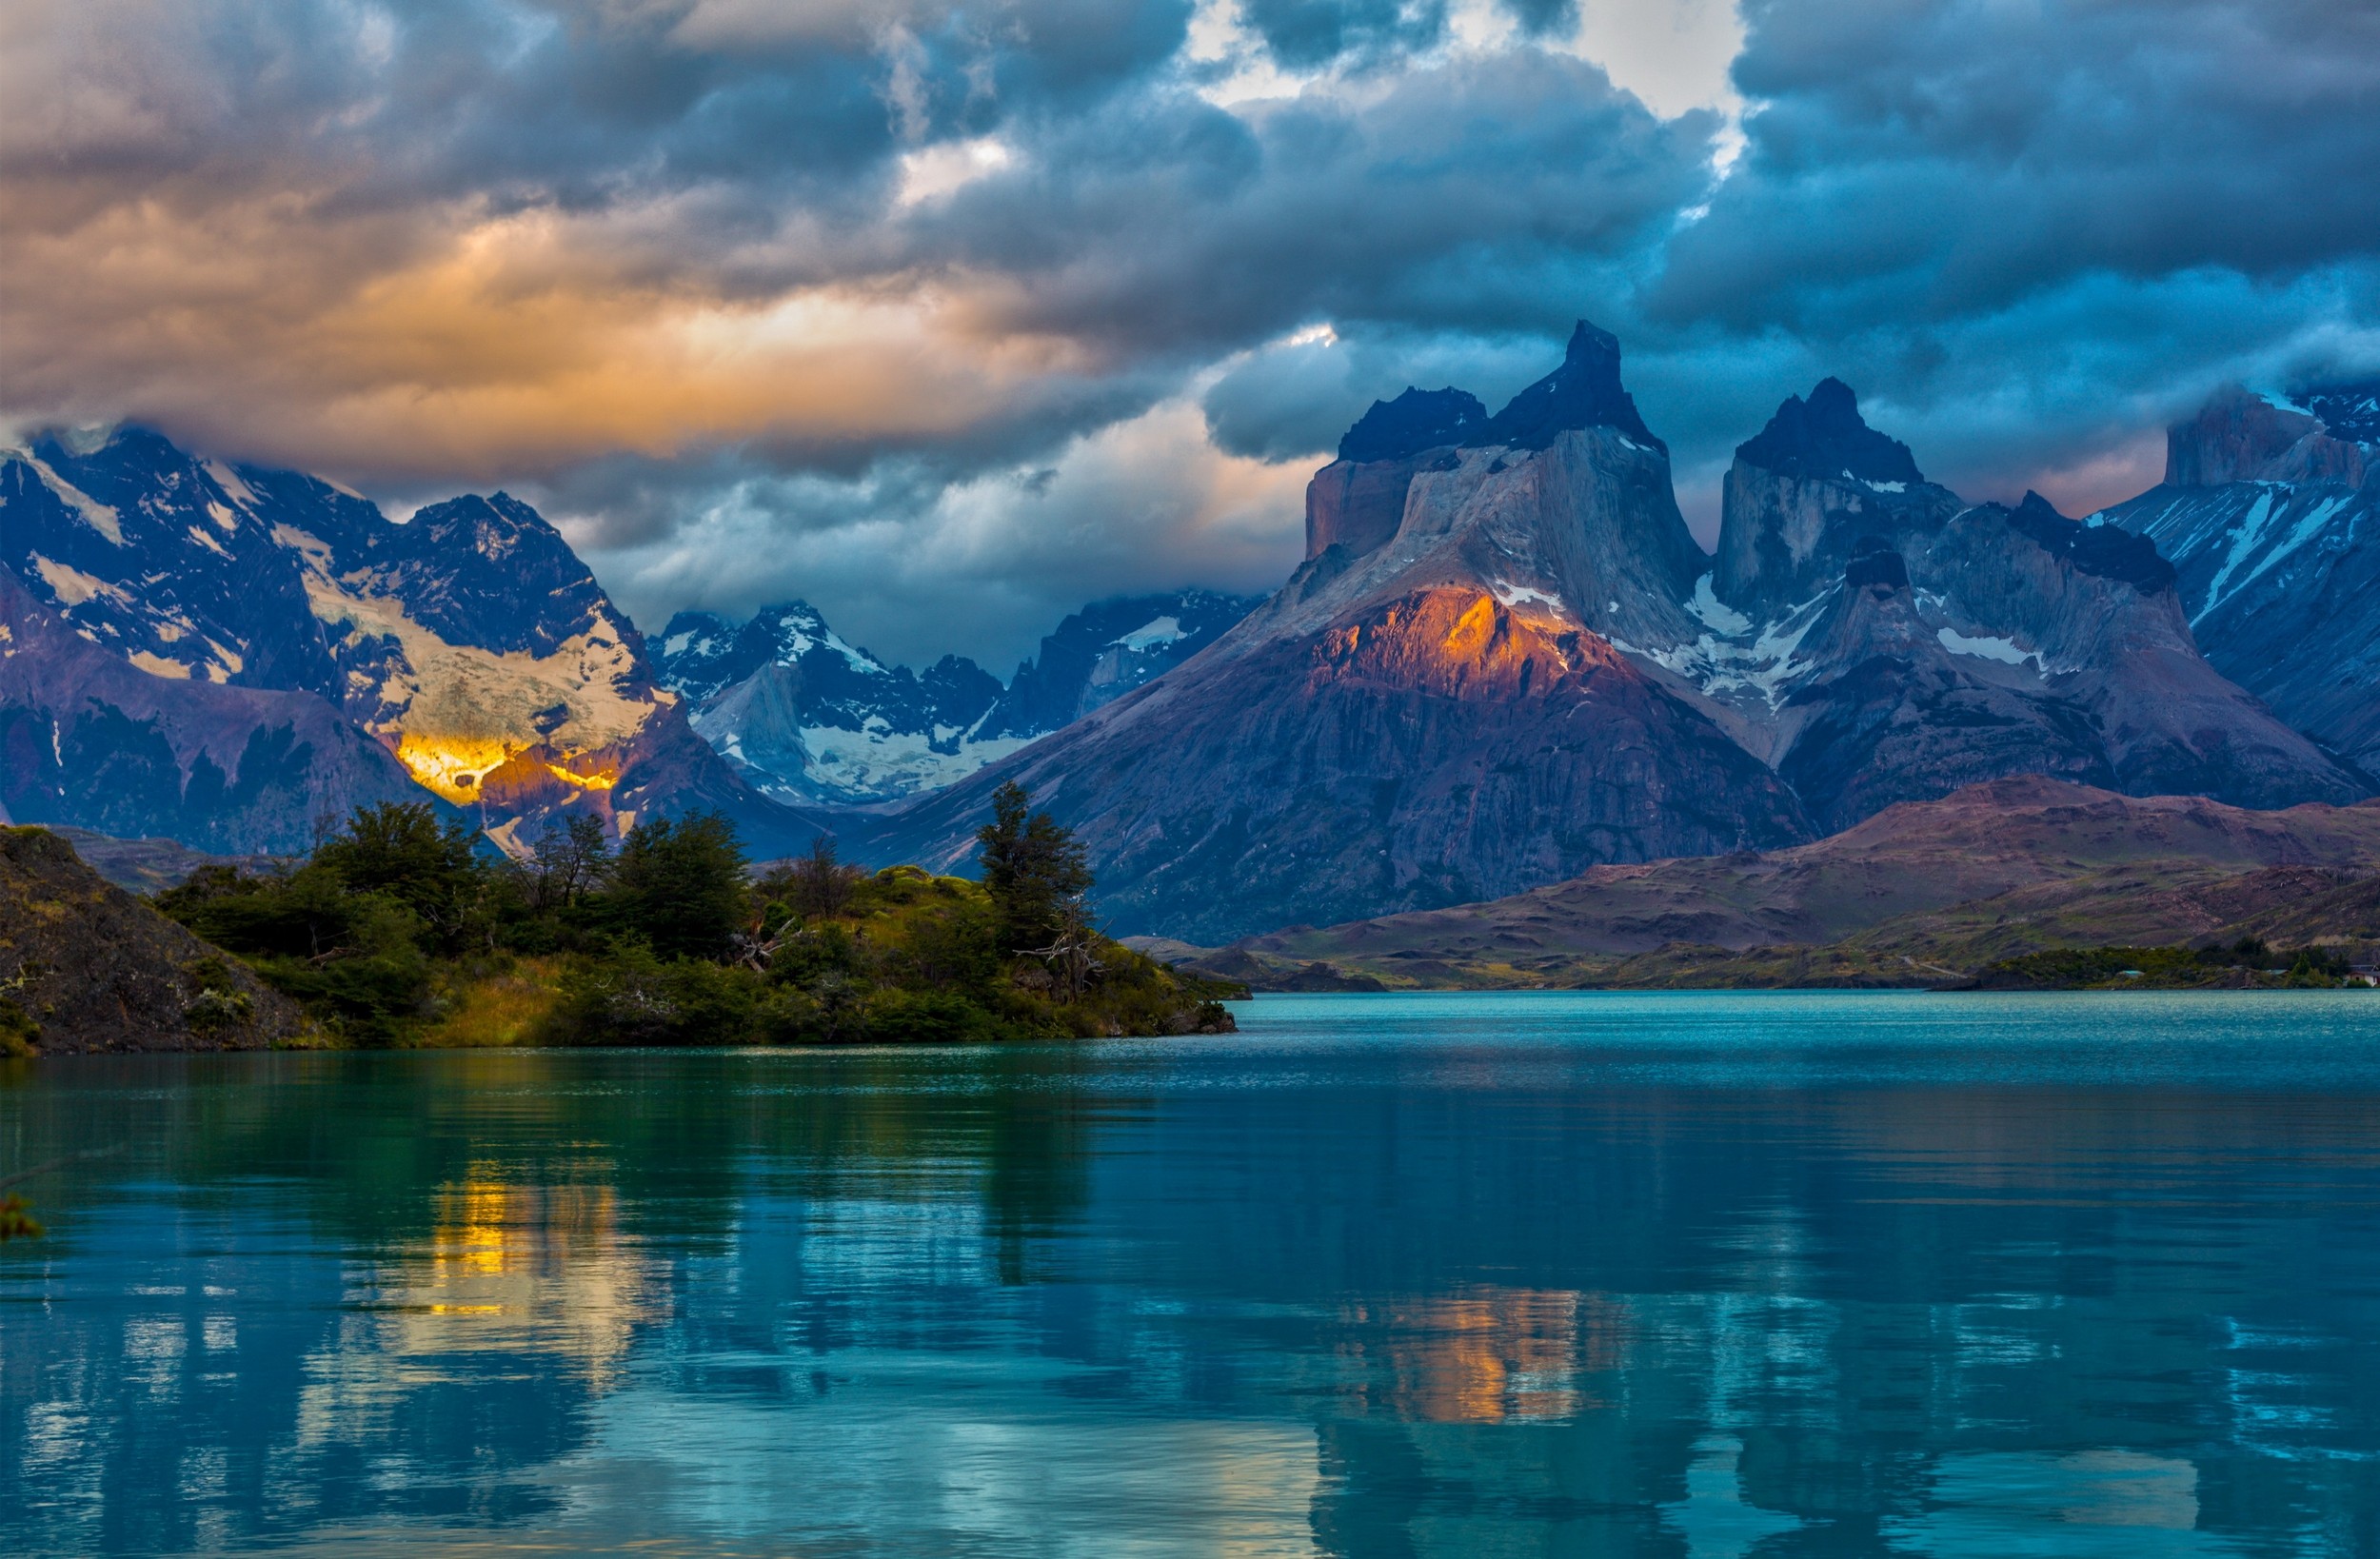 General 2500x1638 Torres del Paine Chile mountains snowy peak lake sunbeams clouds shrubs water nature landscape South America Patagonia